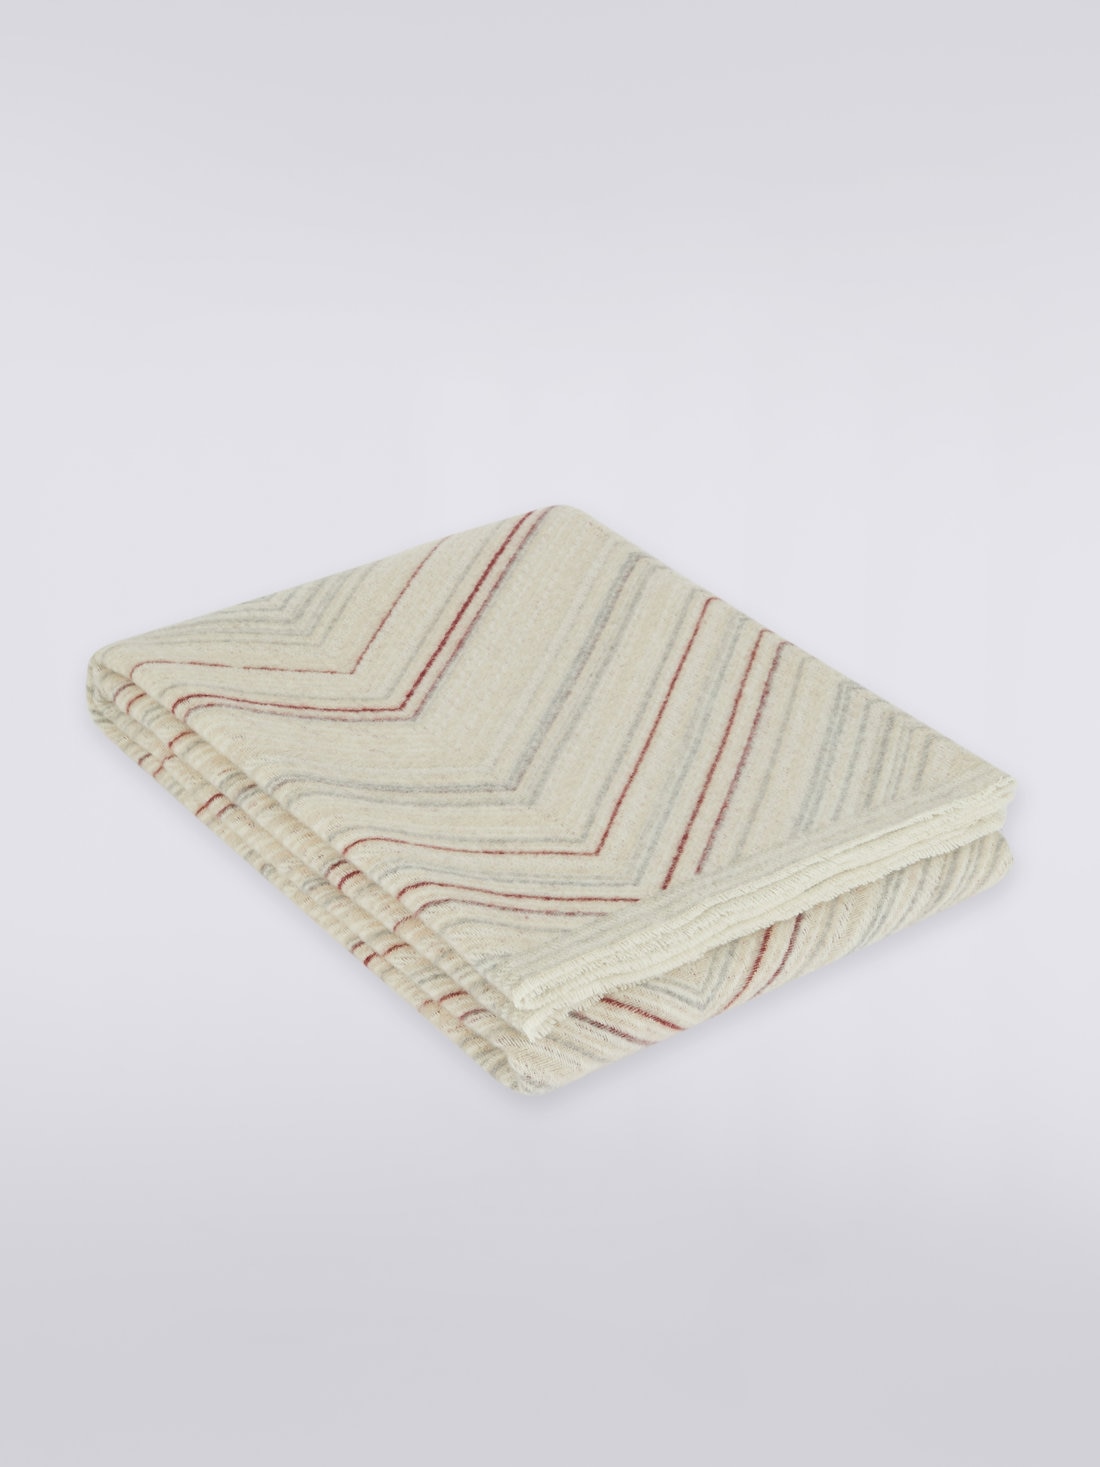 Catullo 130x190 cm wool and cashmere blanket, White  - 8051575836916 - 0